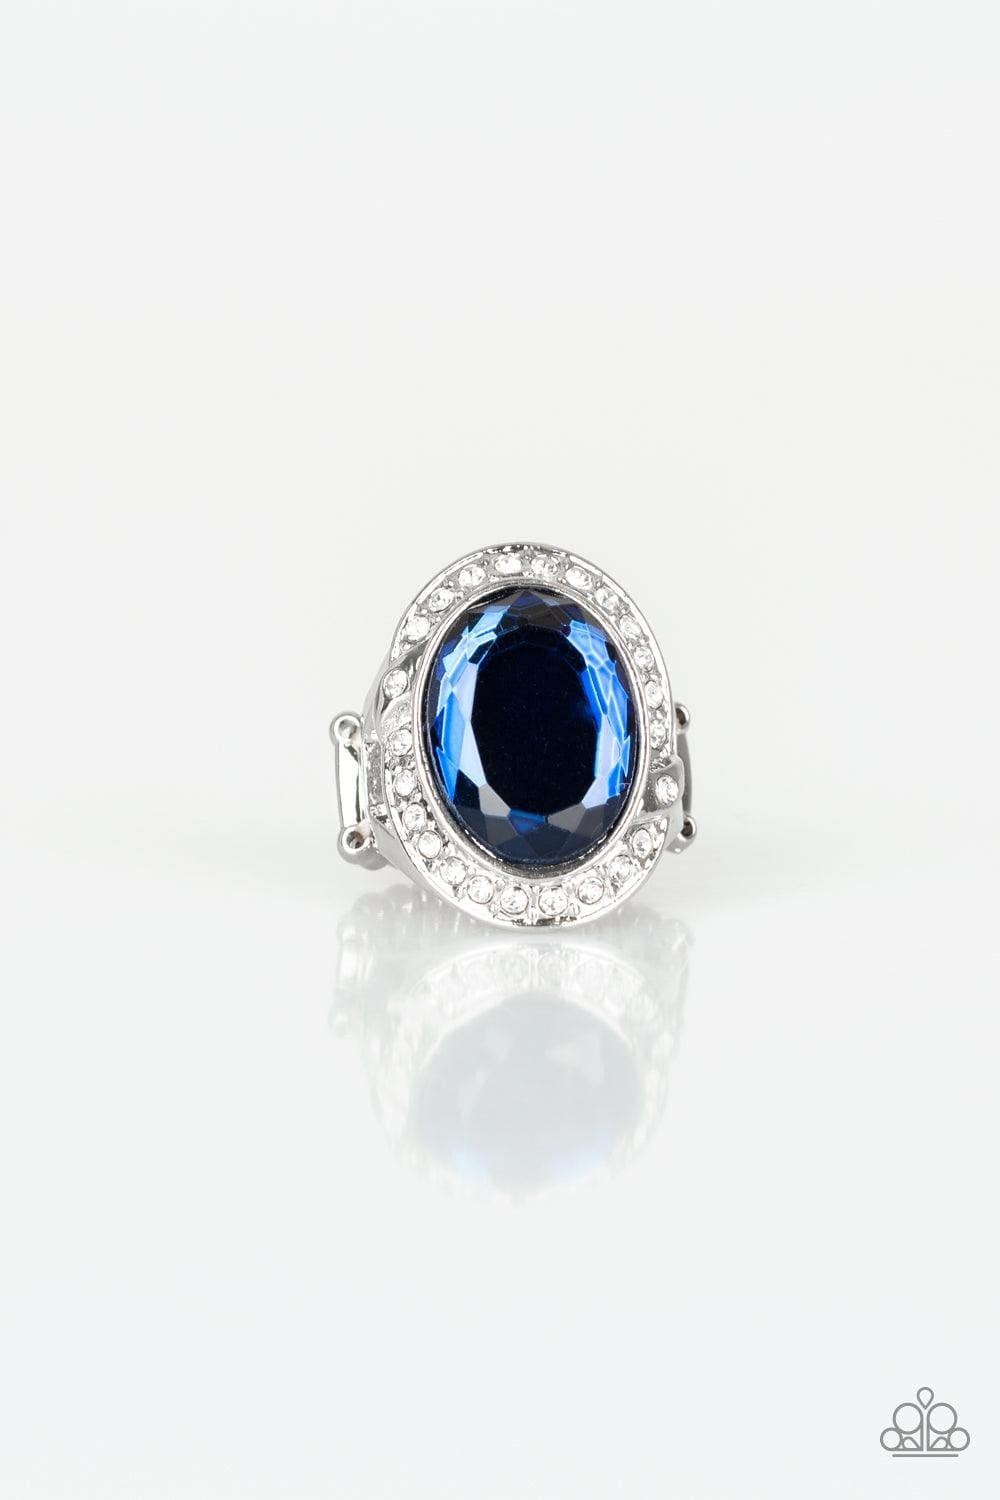 Paparazzi Accessories - Queen Scene - Blue Ring - Bling by JessieK